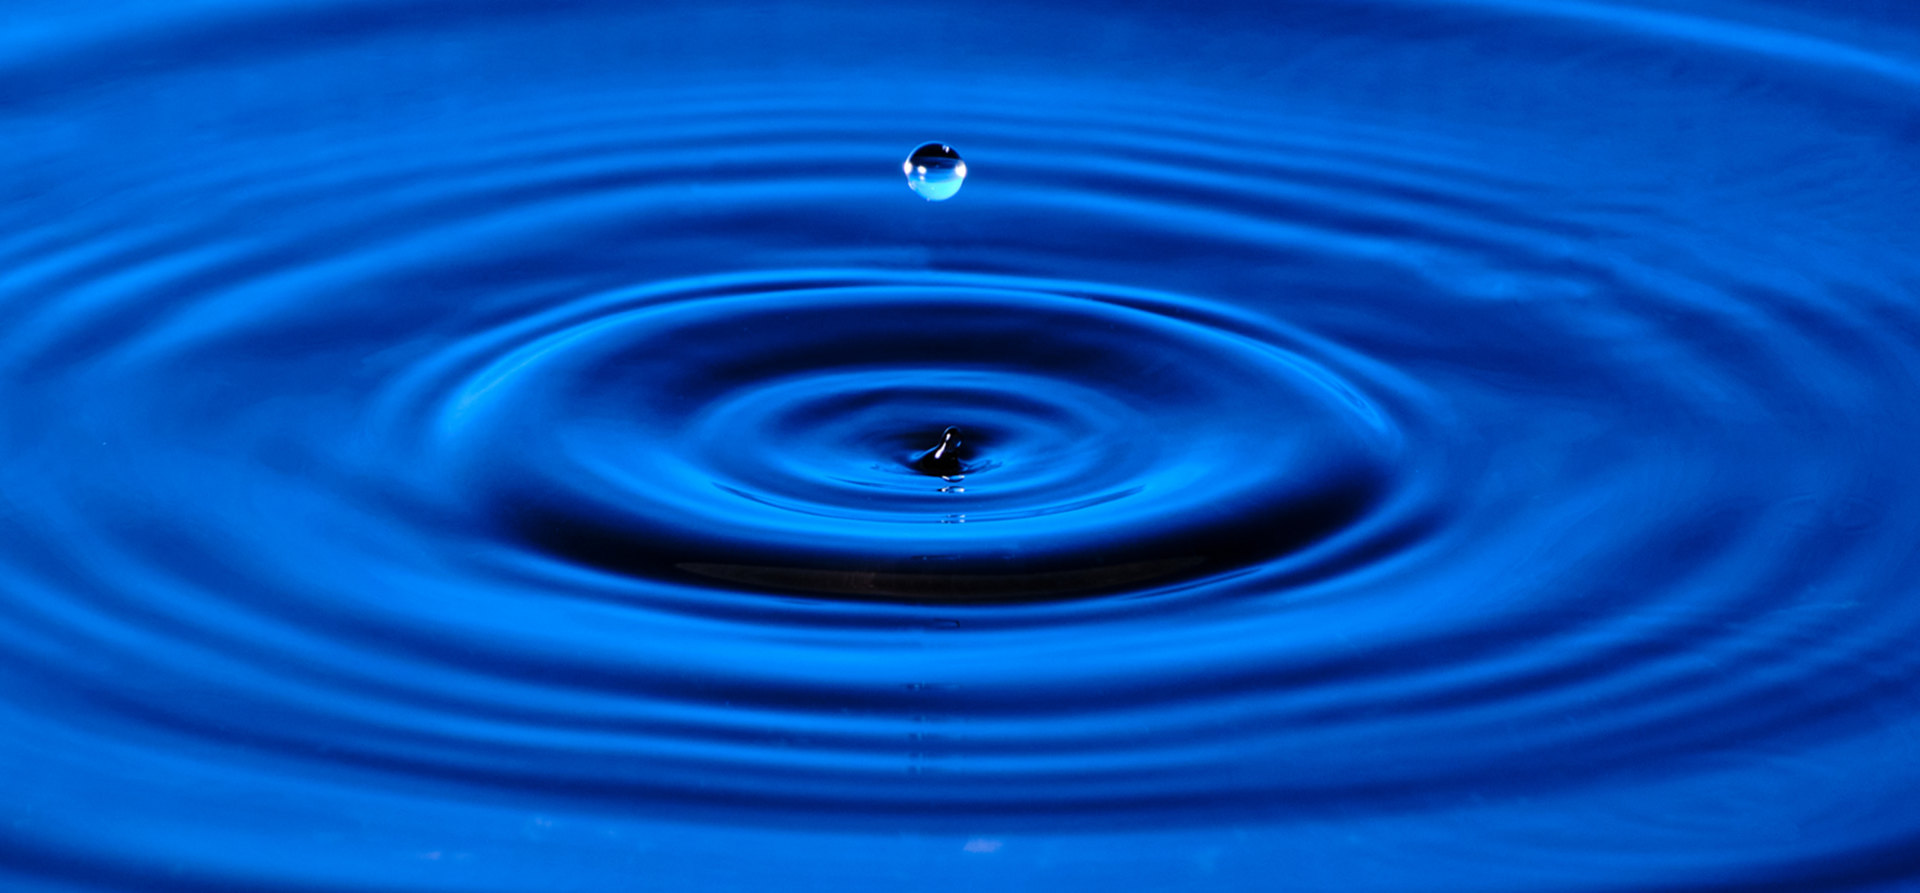 splash-drop-water-with-diverging-water-circles-blue-background 1